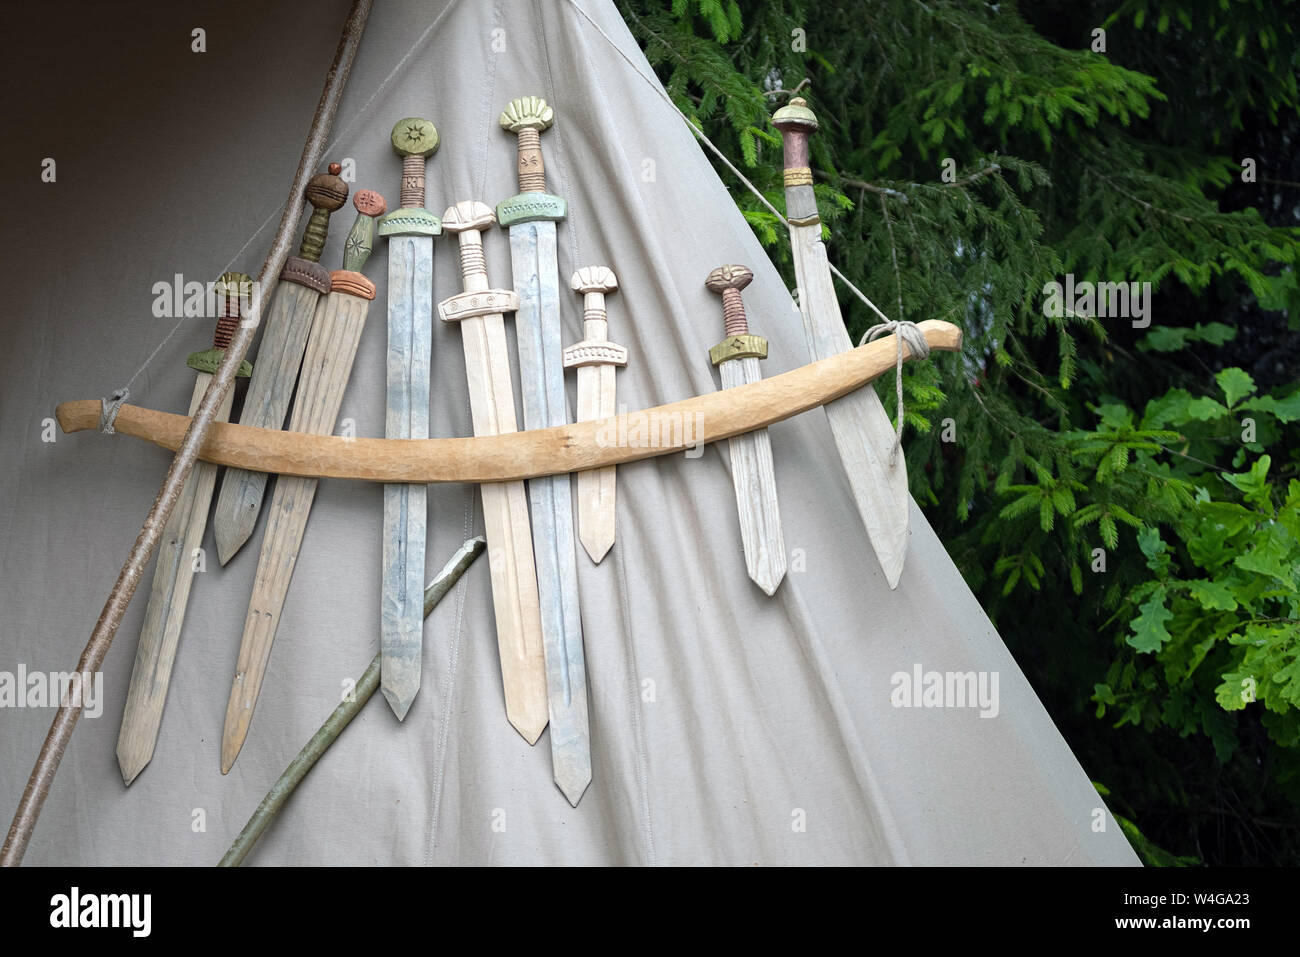 Wooden medieval weapons replicas for close combat displayed on grey fabric texture Stock Photo